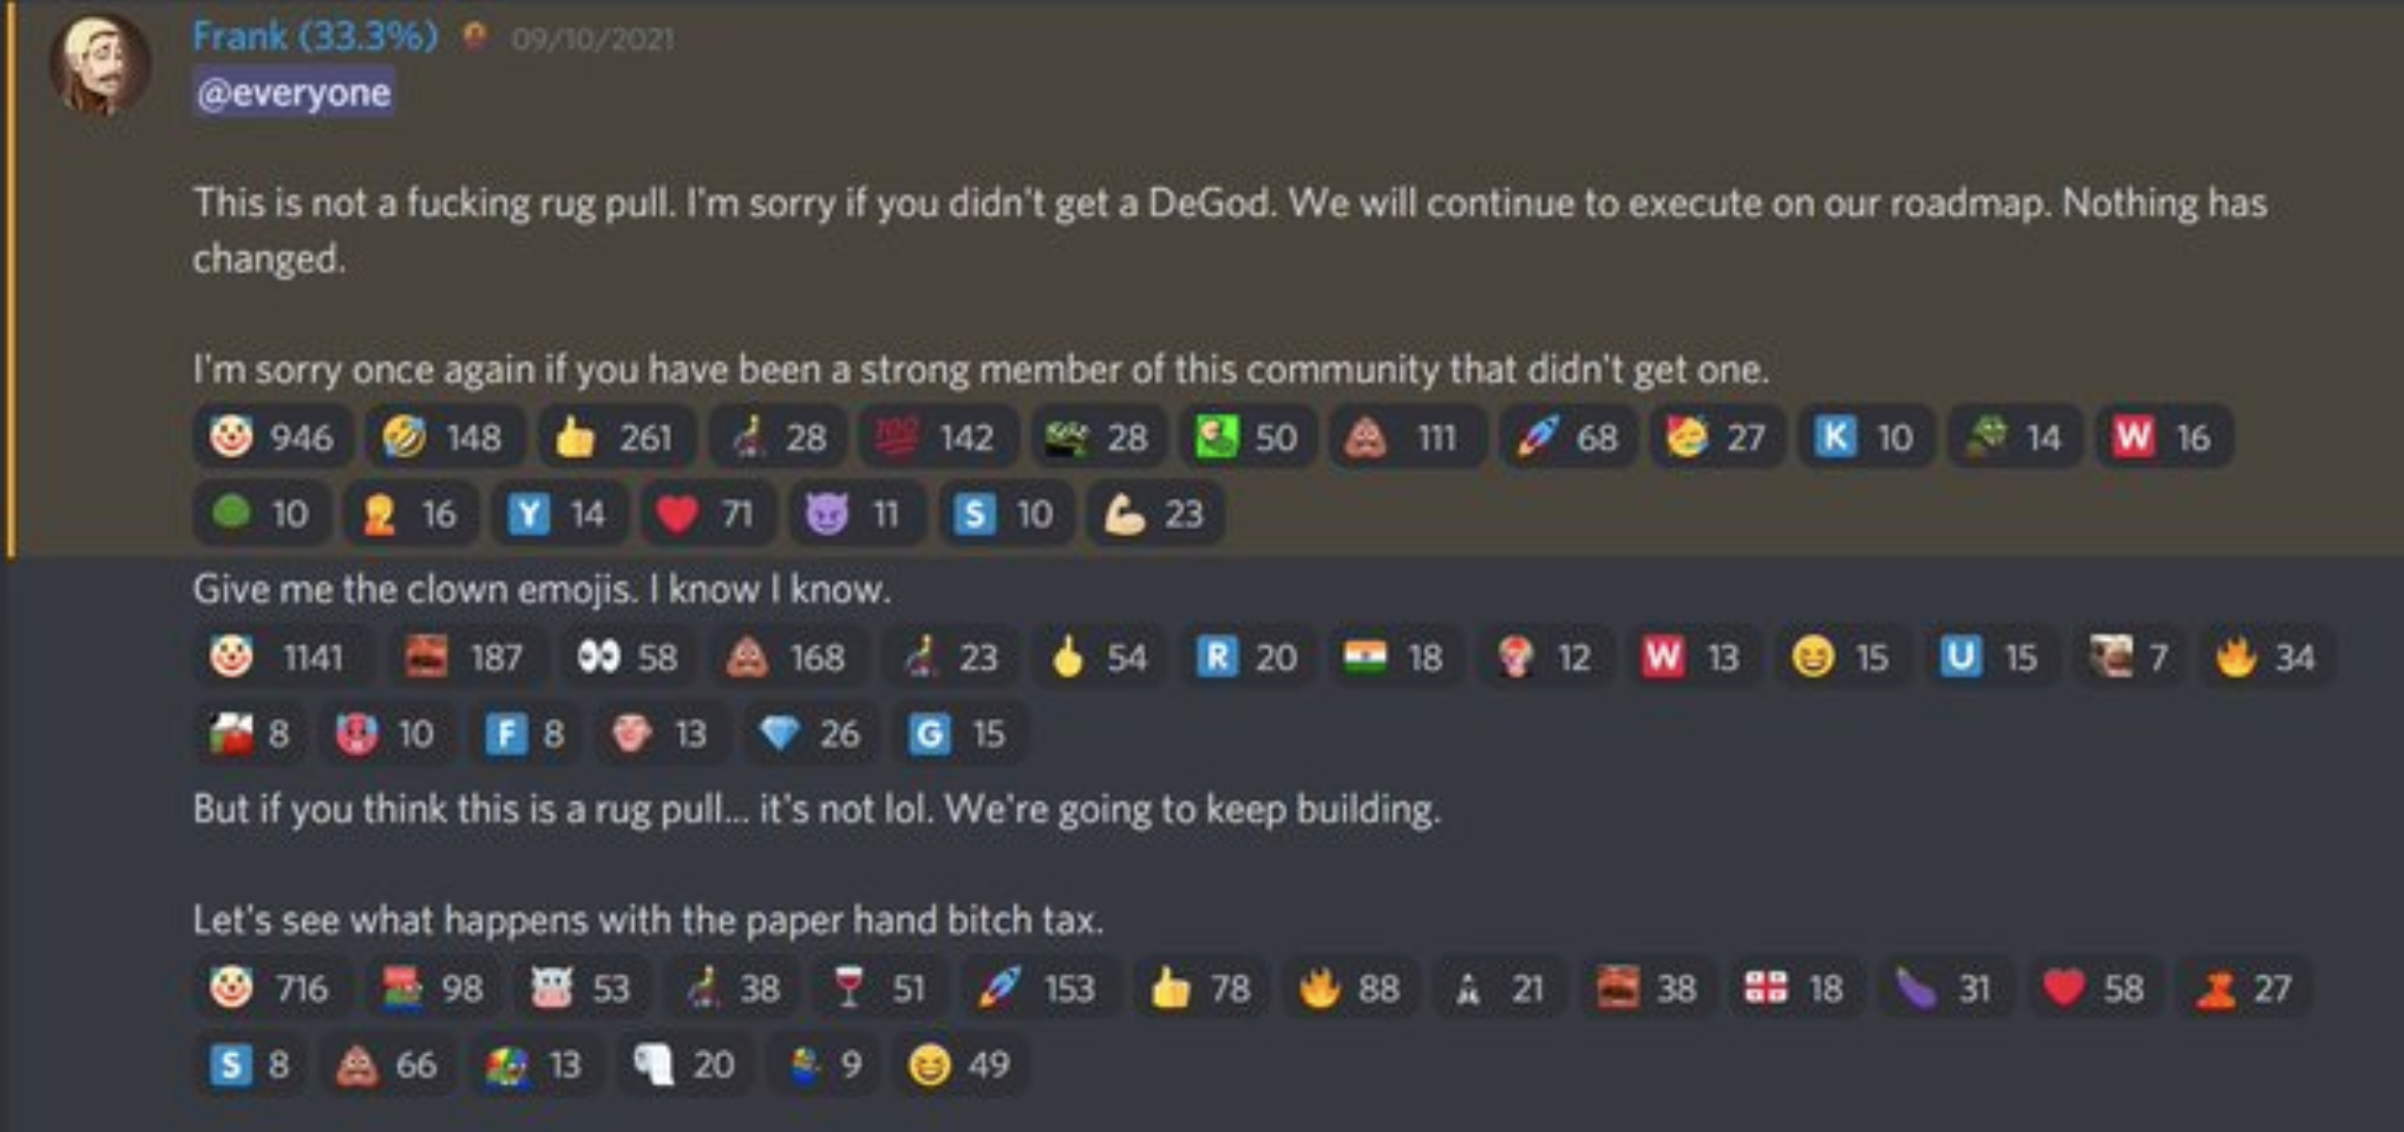 Frank’s Discord Announcement The Day After DeGods’ Mint